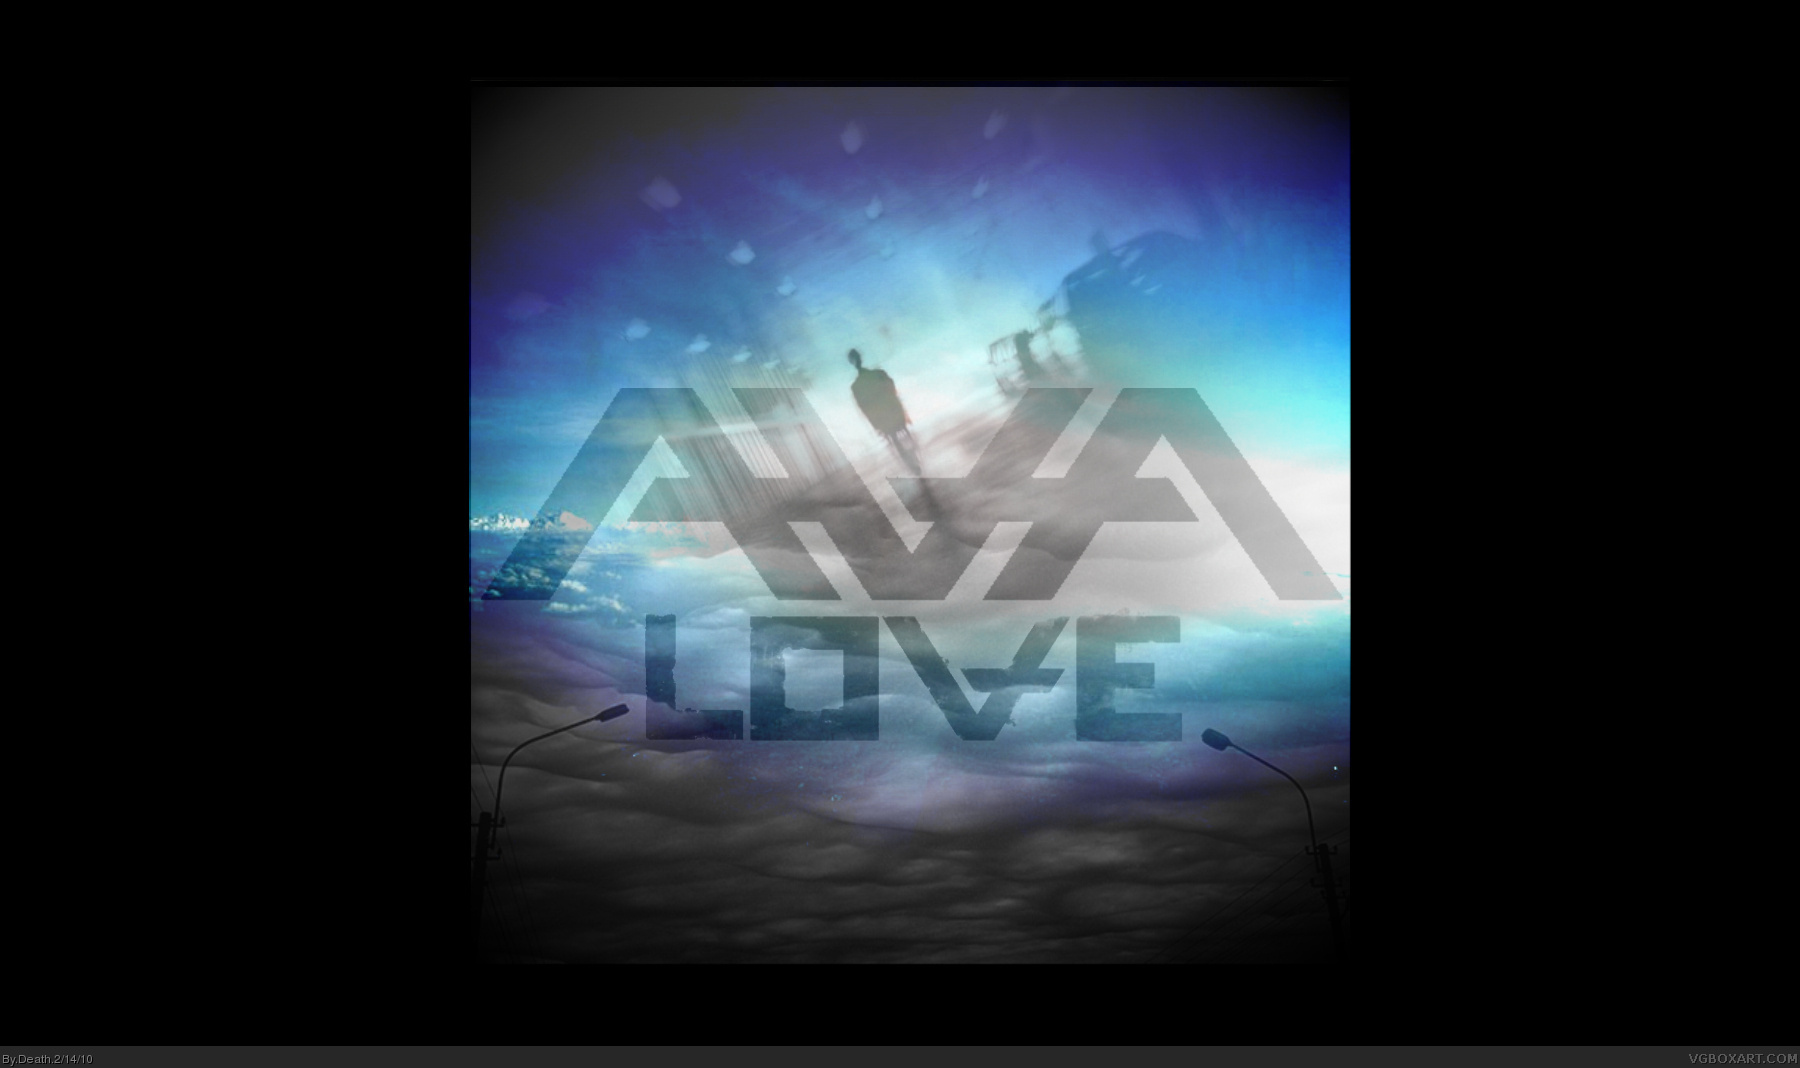 Angels and Airwaves: Love box cover